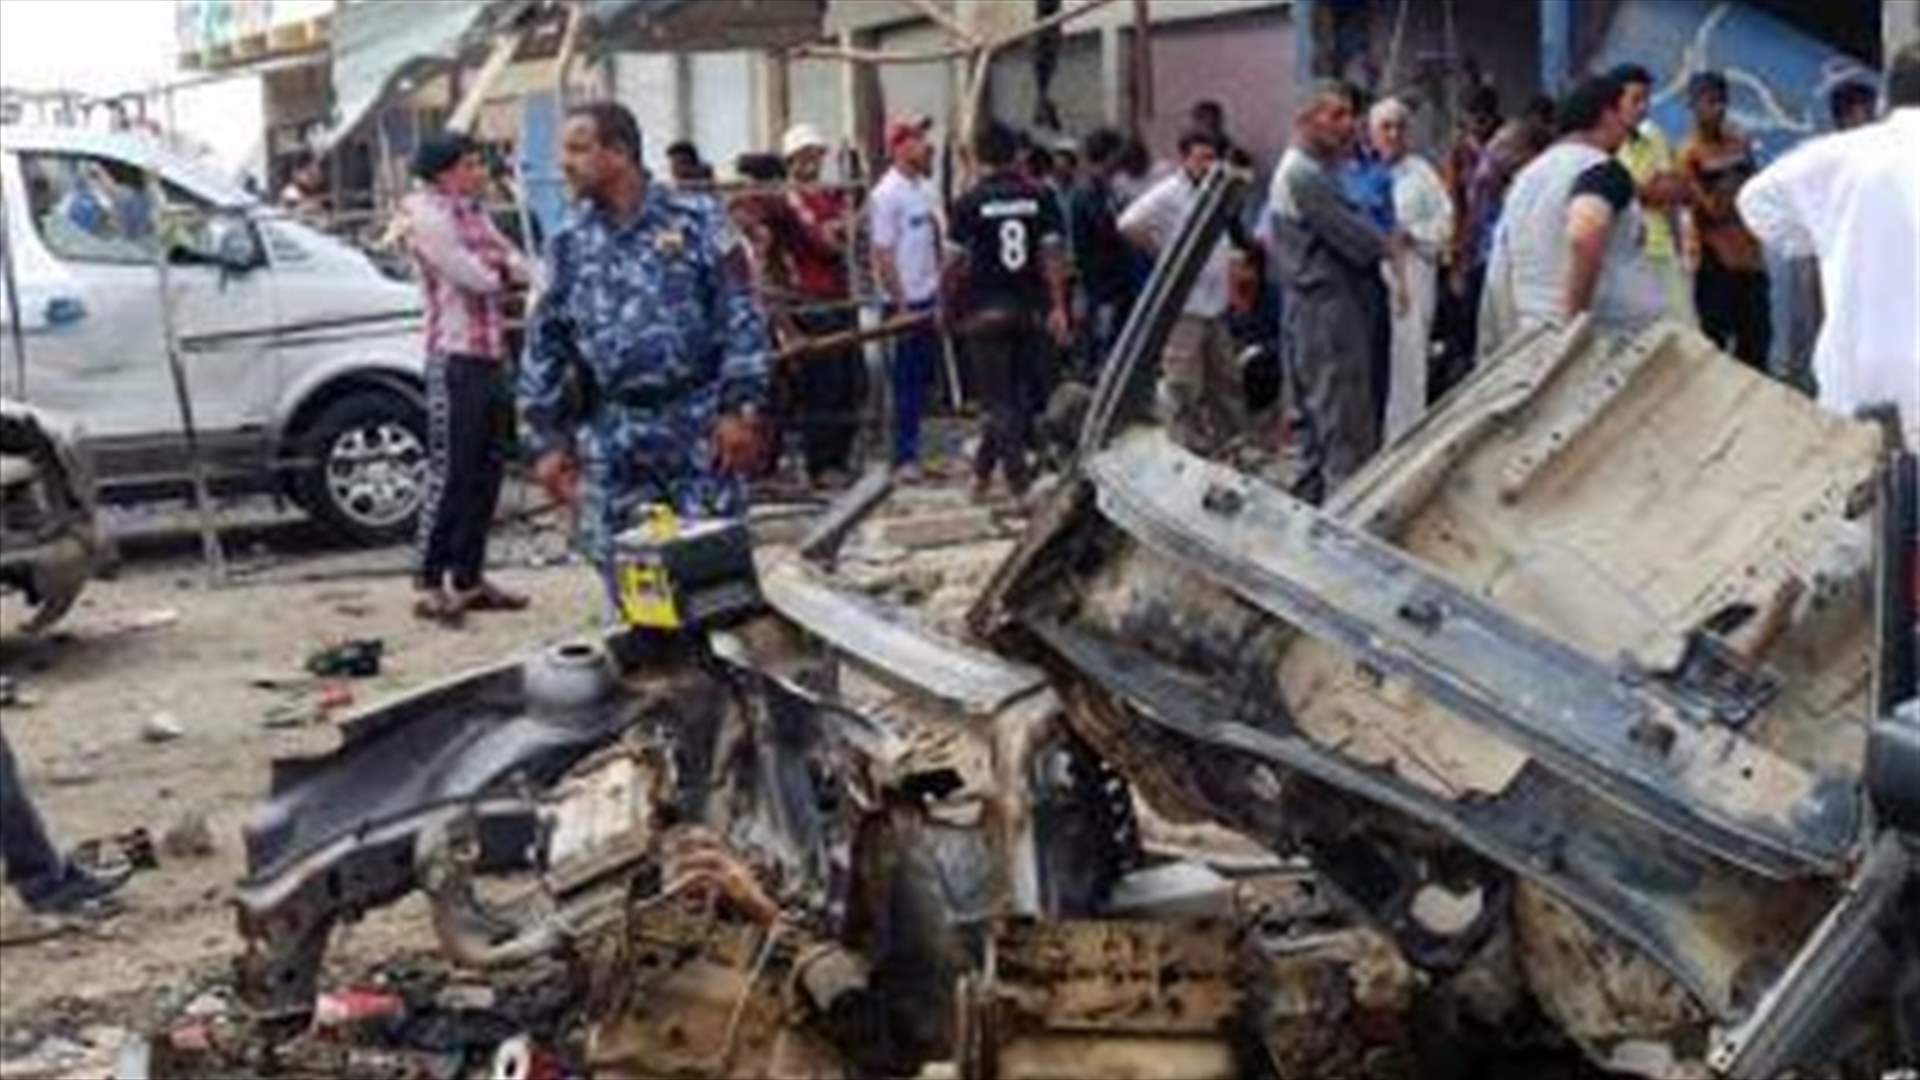 Car bomb kills 8, wounds at least 30, in eastern Baghdad - police